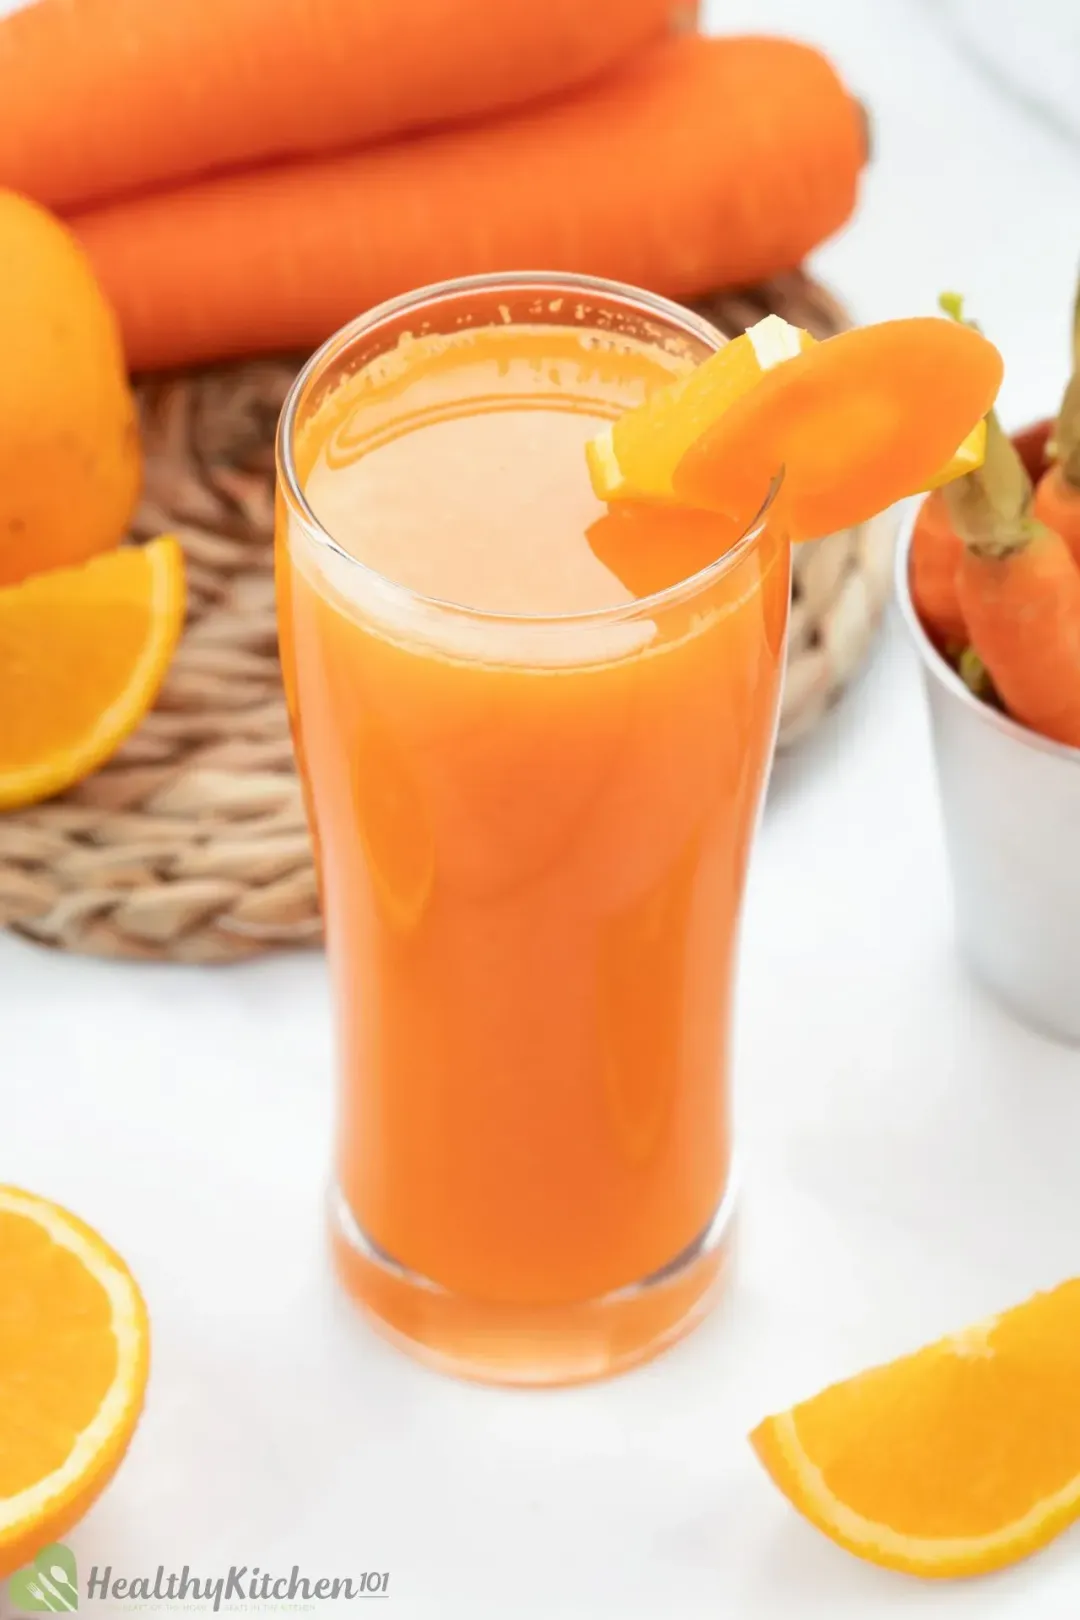 A tall glass of carrot orange juice next to some orange wedges, carrots